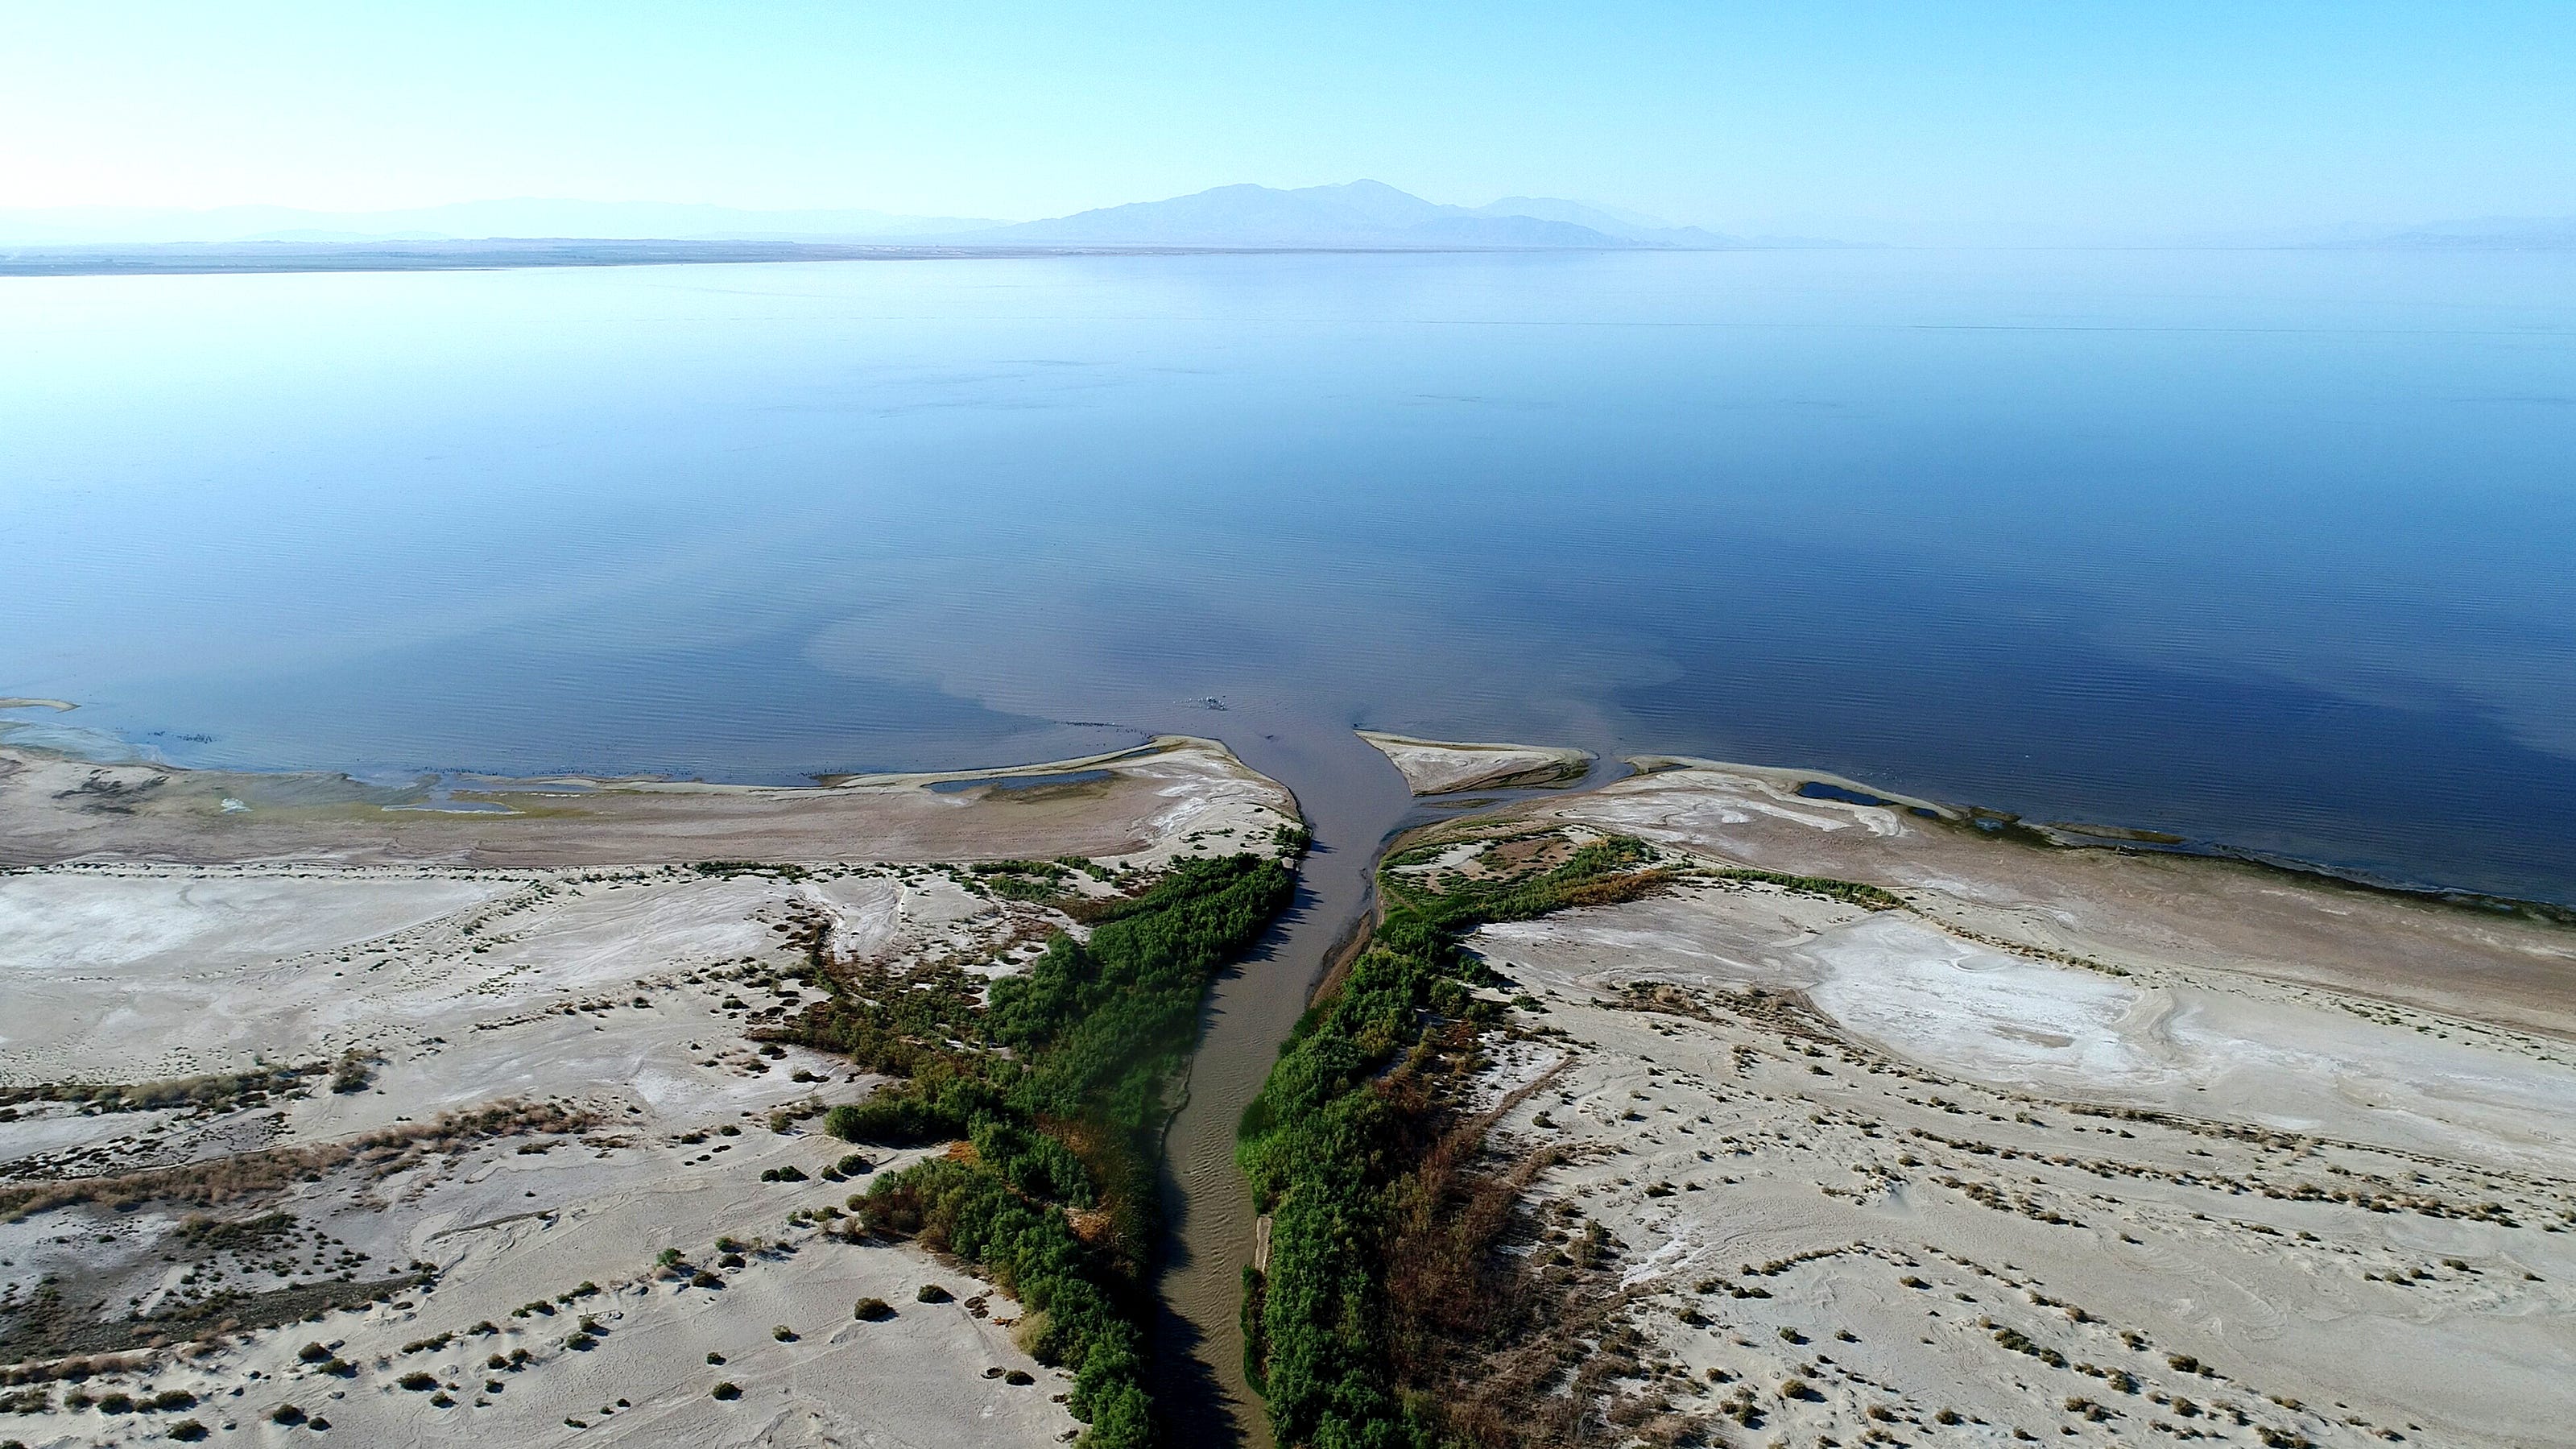 Salton Sea deal reached. California's largest water body may finally